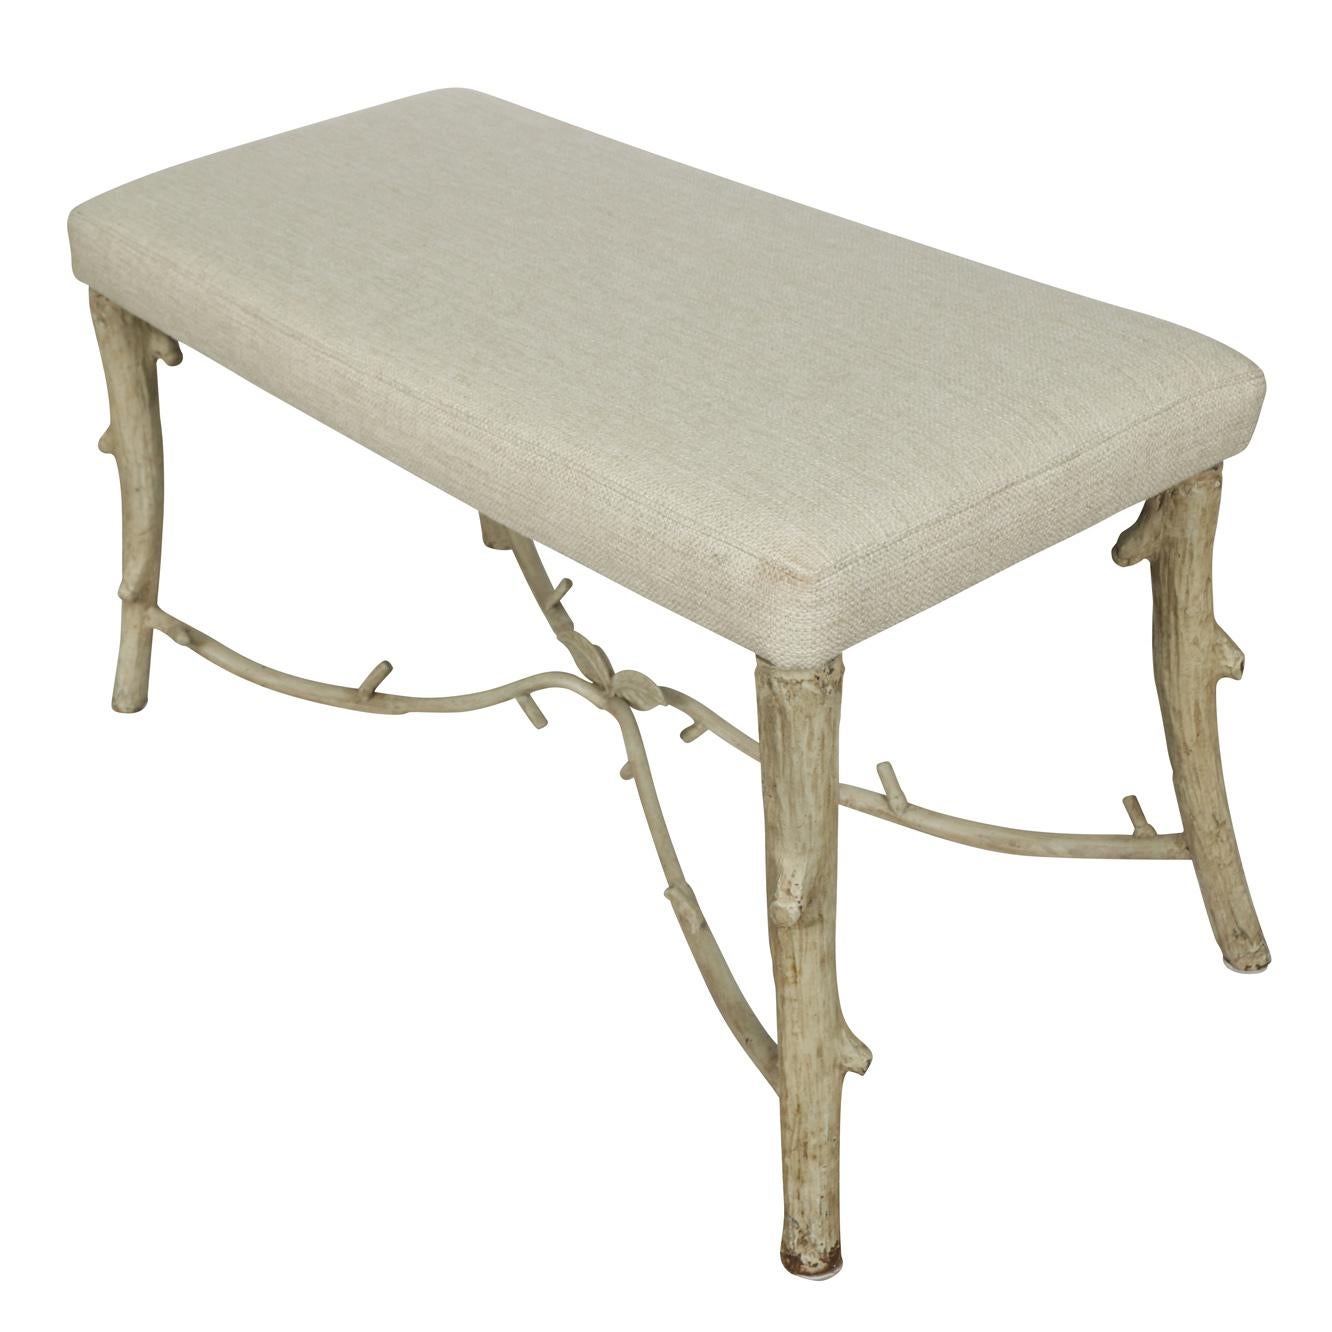 We love the whimsy of this small bench. The linen covered seat is supported by a painted metal faux bois base forming a lovely cross stretcher adorned with leaves.